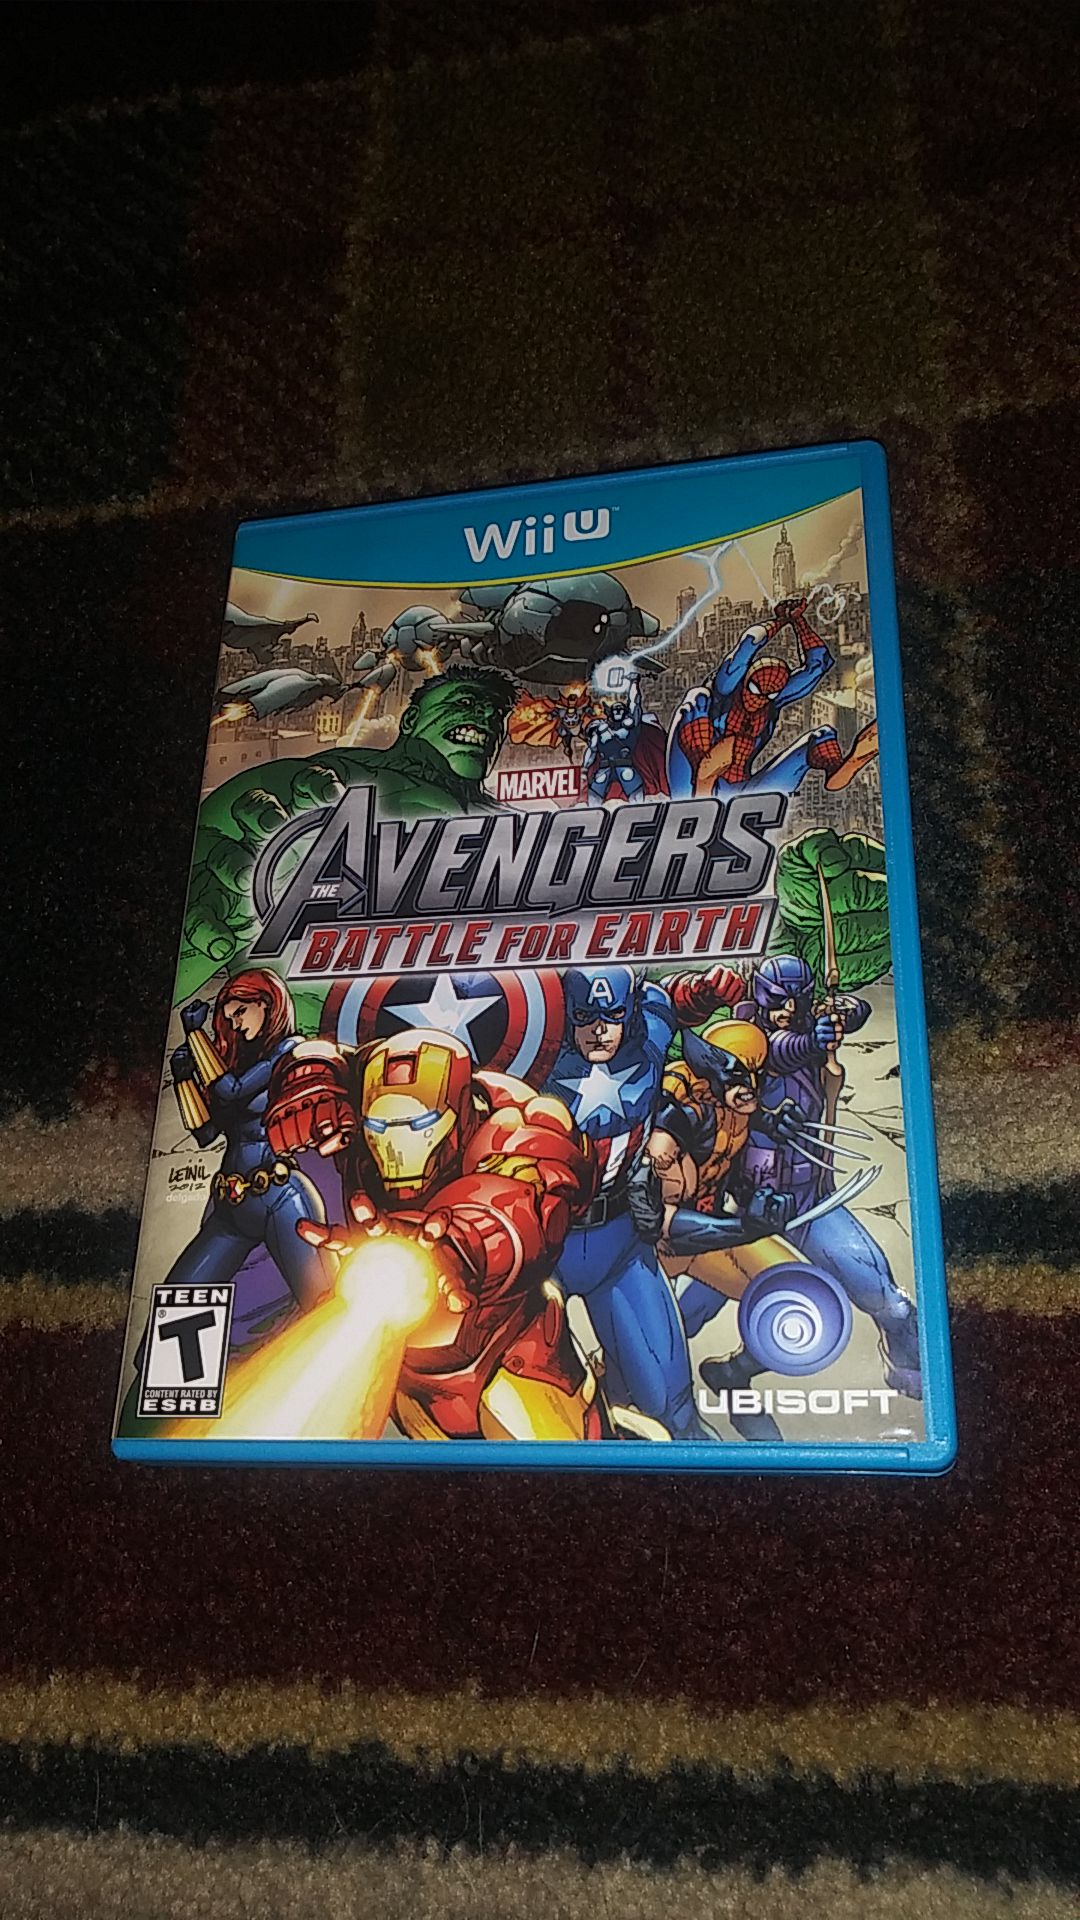 AVENGERS - BATTLE FOR EARTH - (USED) Nintendo Wii U video game